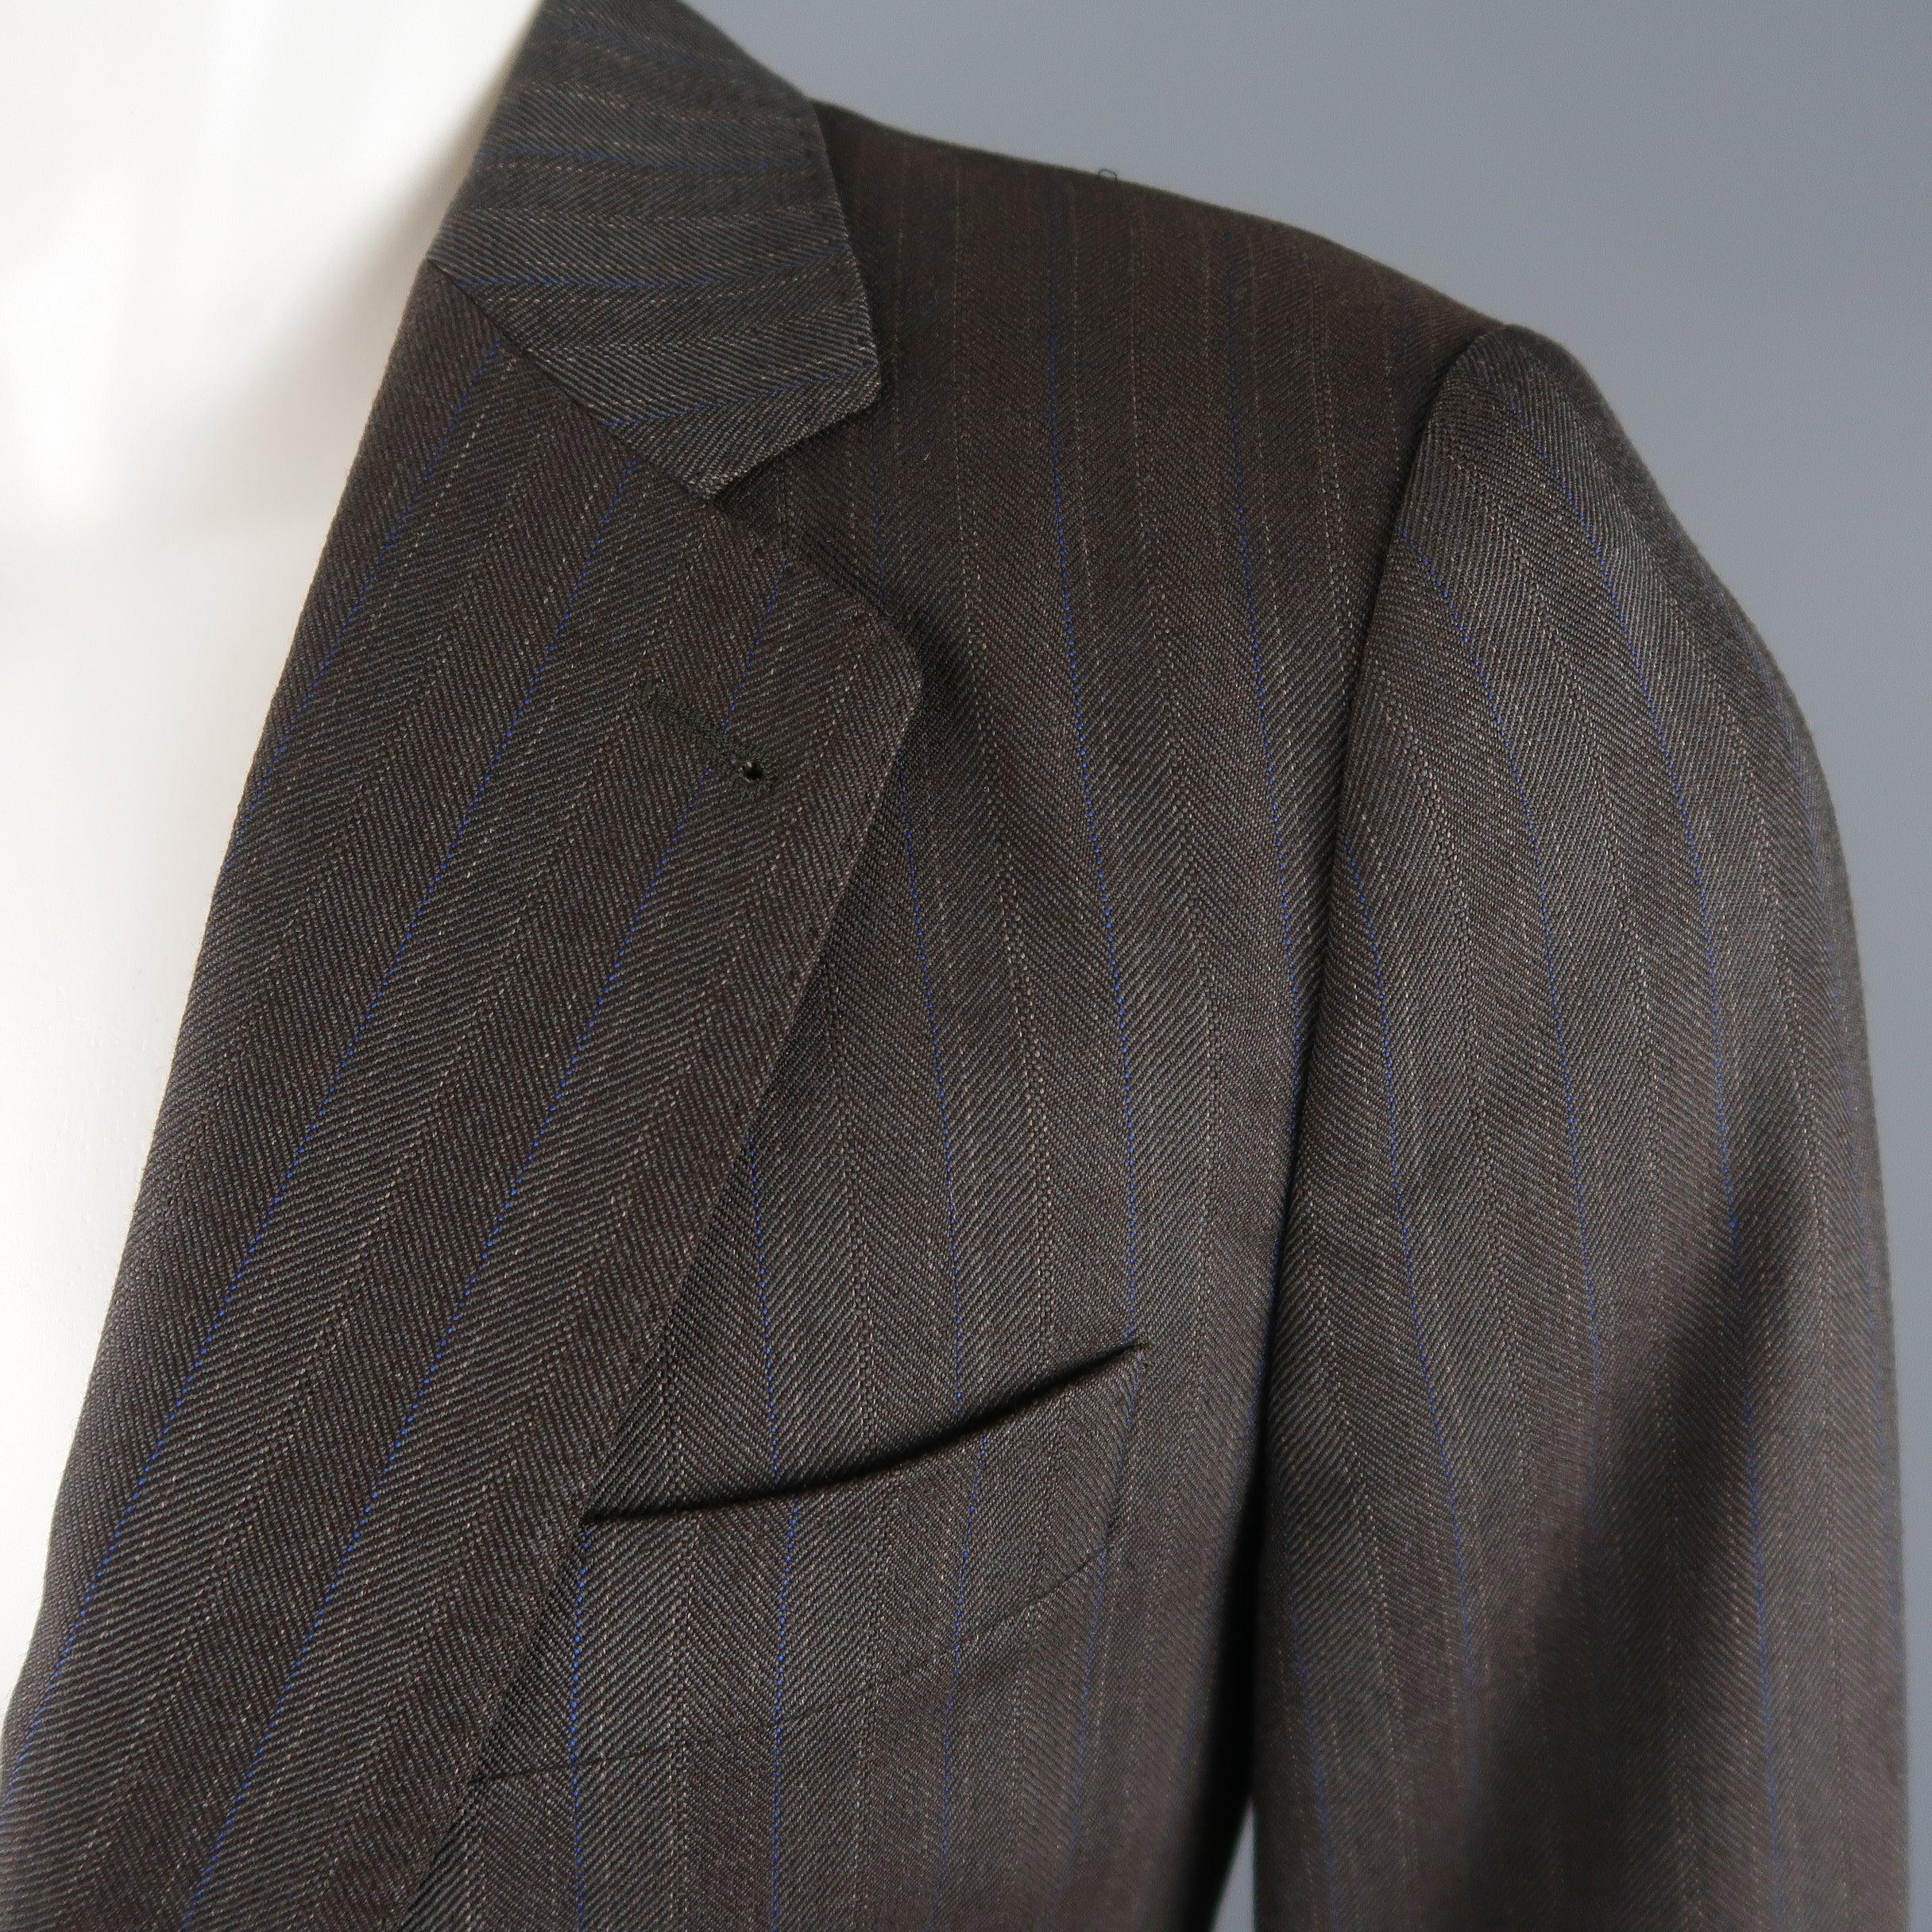 DRIES VAN NOTEN sport coat comes in brown and blue striped wool blend twill with a single breasted, two button closure, top stitching, and functional button cuffs. Made in Morocco.Excellent Pre-Owned Condition. 

Marked:   IT 46 

Measurements: 
